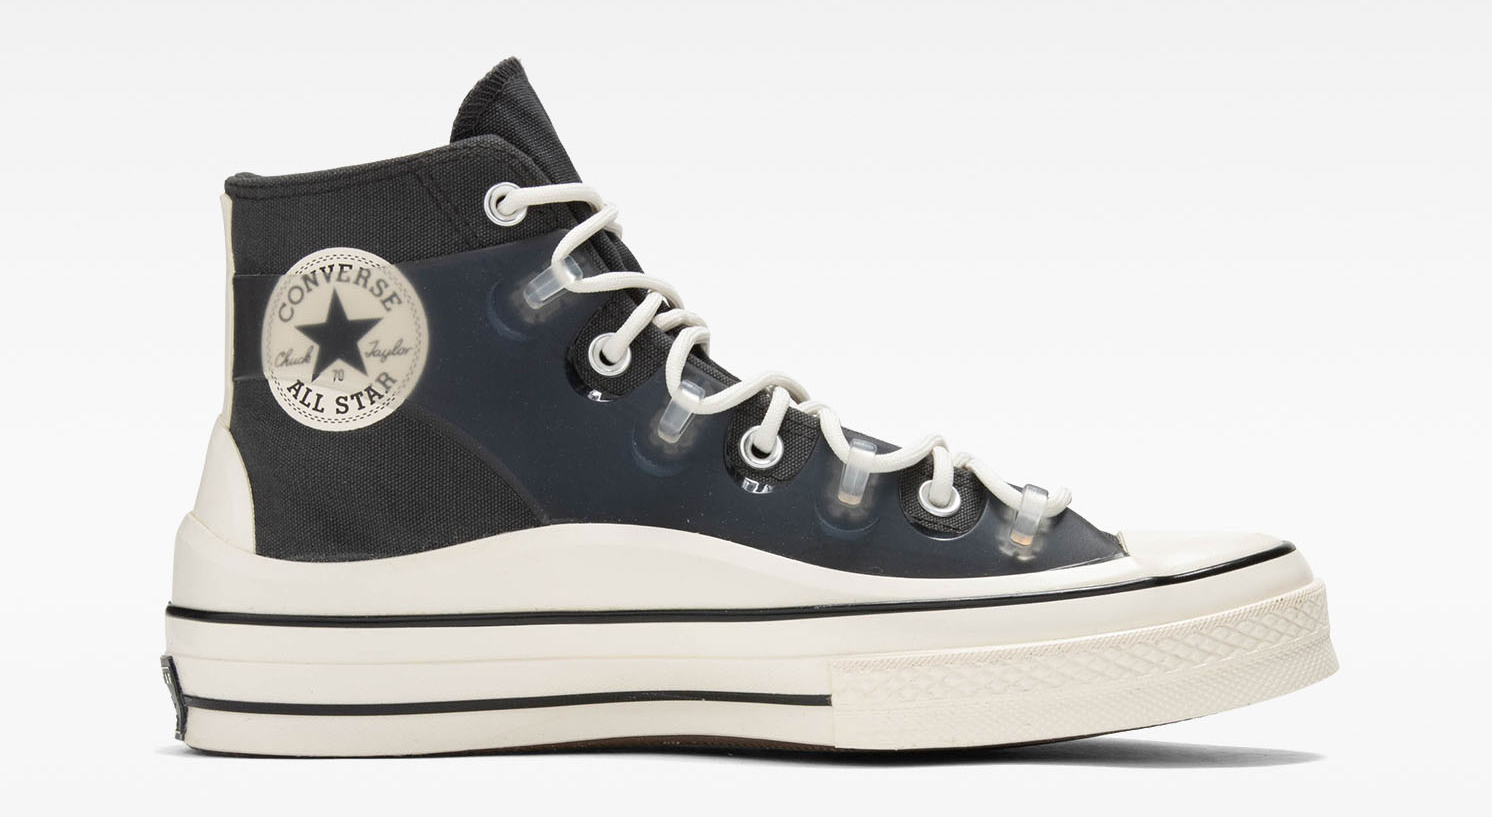 Unisex Converse Chuck 70 Utility Canvas High Top Storm Wind now $120 delivered with coupon